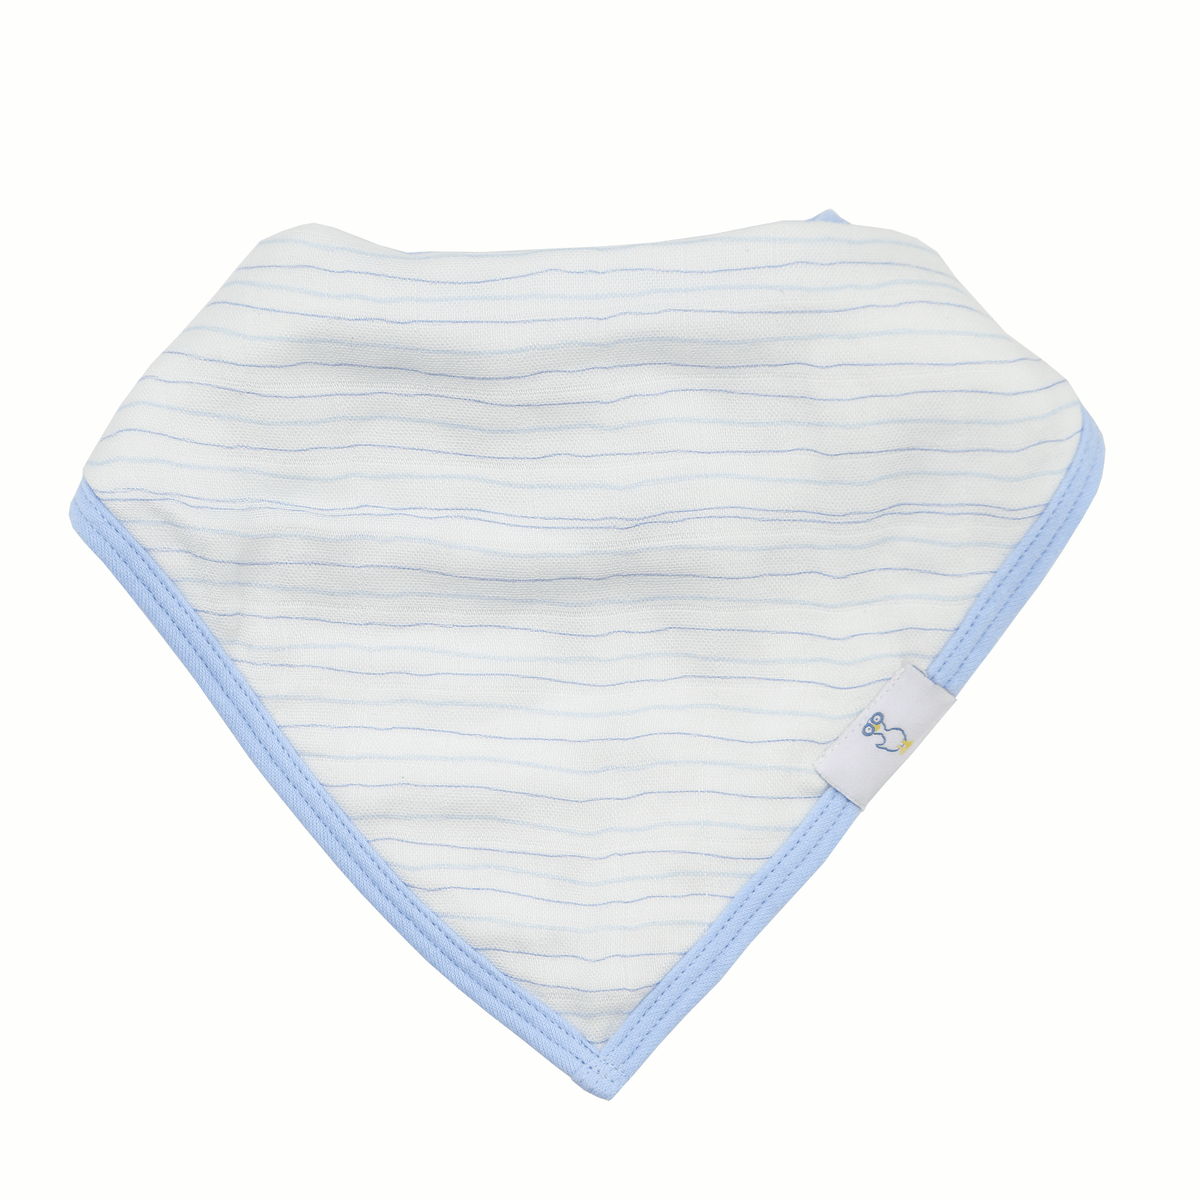 Goosewaddle 2 Pack Muslin &amp; Terry Cloth Bib Set, Blue Popsicles and Stripes